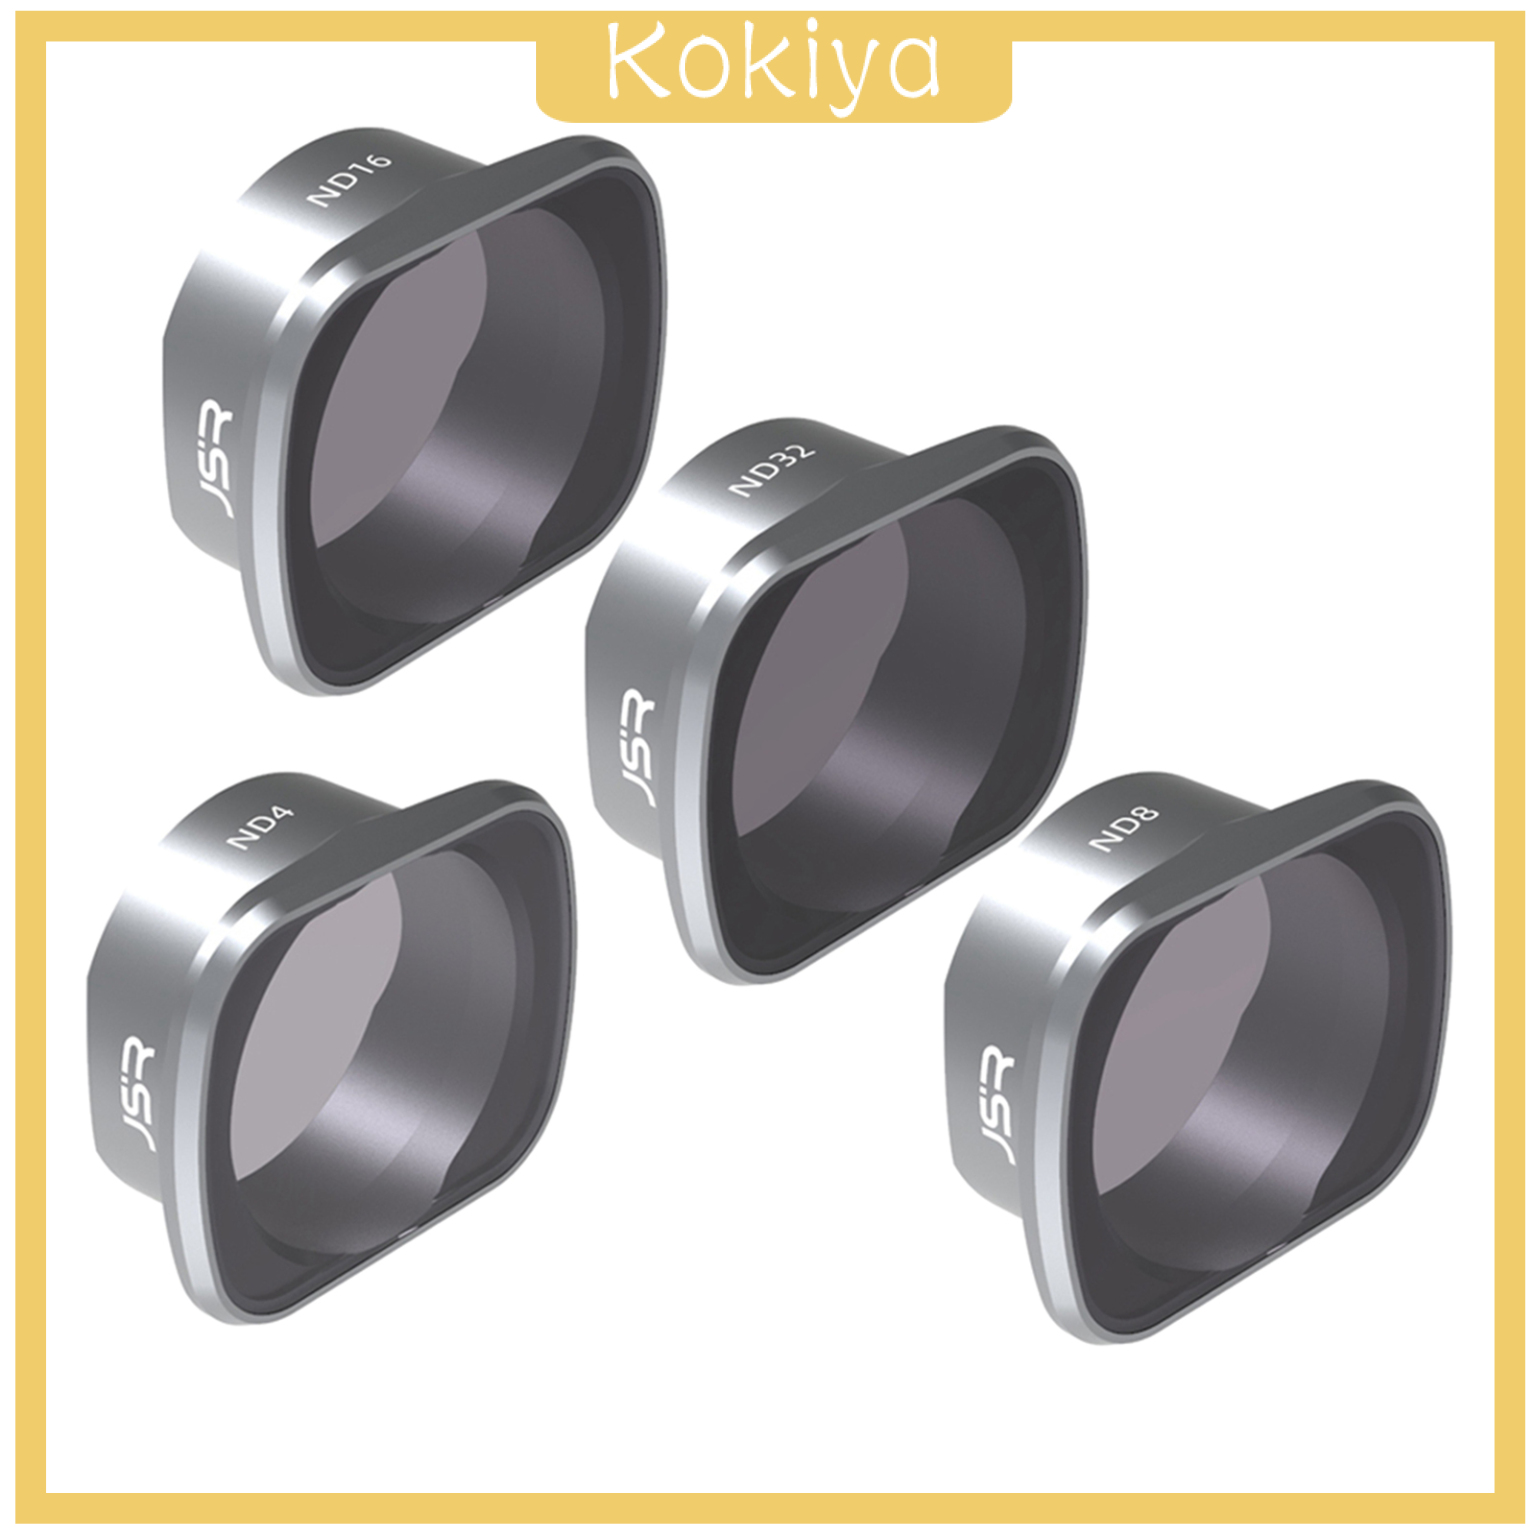 [KOKIYA]High Quality ND4 ND32 Lens Filter for DJI FPV Combo Drone Accessories